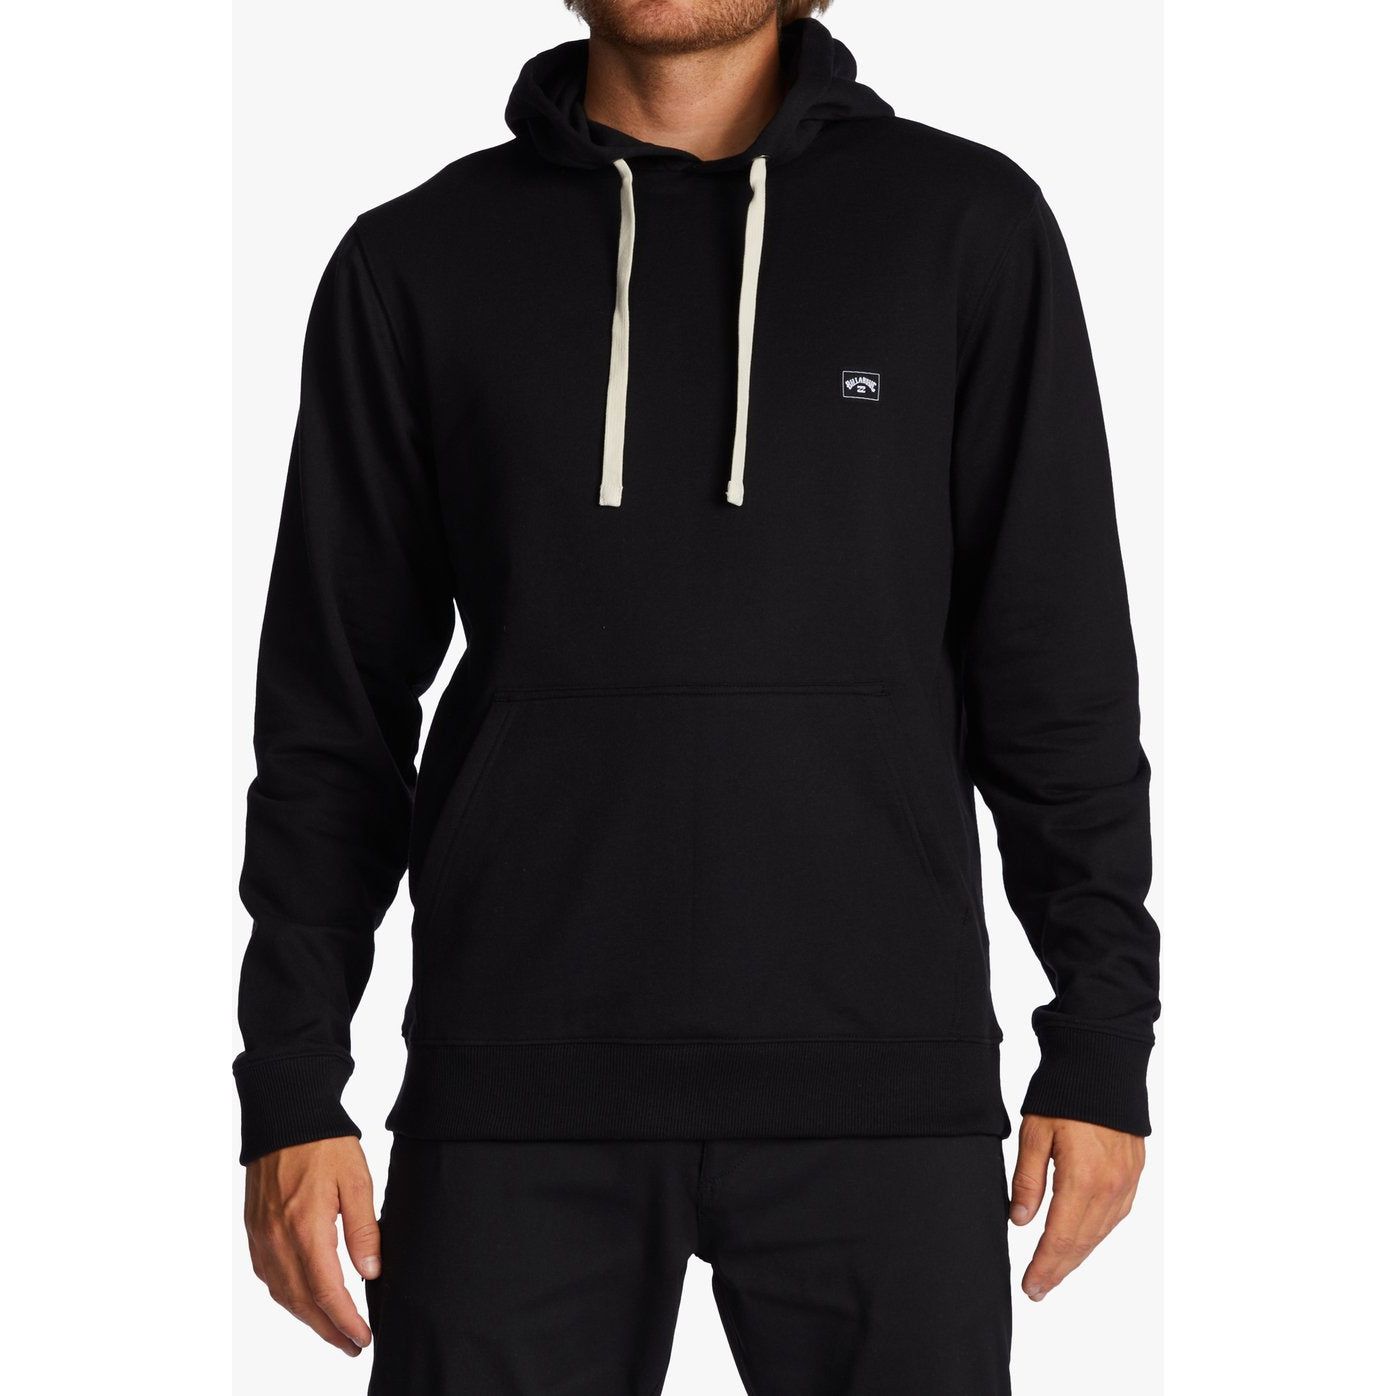 Billabong - All Day Organic Pullover Hoodie in Black-SQ2831777